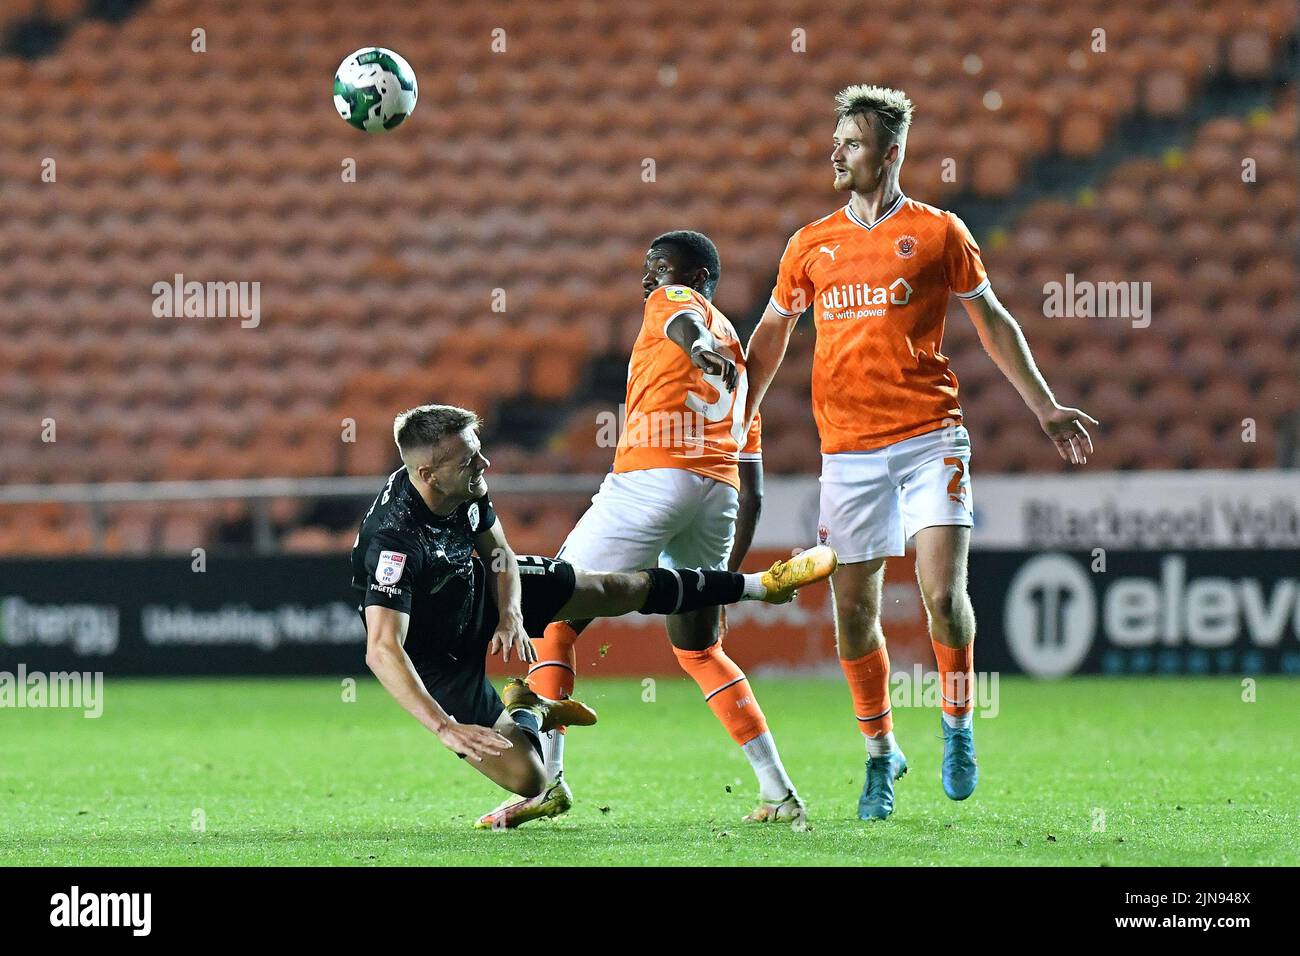 during the Carabao Cup match between Blackpool and Barrow at Bloomfield Road, Blackpool on Tuesday 9th August 2022. (Credit: Eddie Garvey | MI News)Tom White of Barrow Association Football Club is tackled by Beryly Lubala of Blackpool Football Club during the Carabao Cup match between Blackpool and Barrow at Bloomfield Road, Blackpool on Tuesday 9th August 2022. (Credit: Eddie Garvey | MI News) Credit: MI News & Sport /Alamy Live News Stock Photo